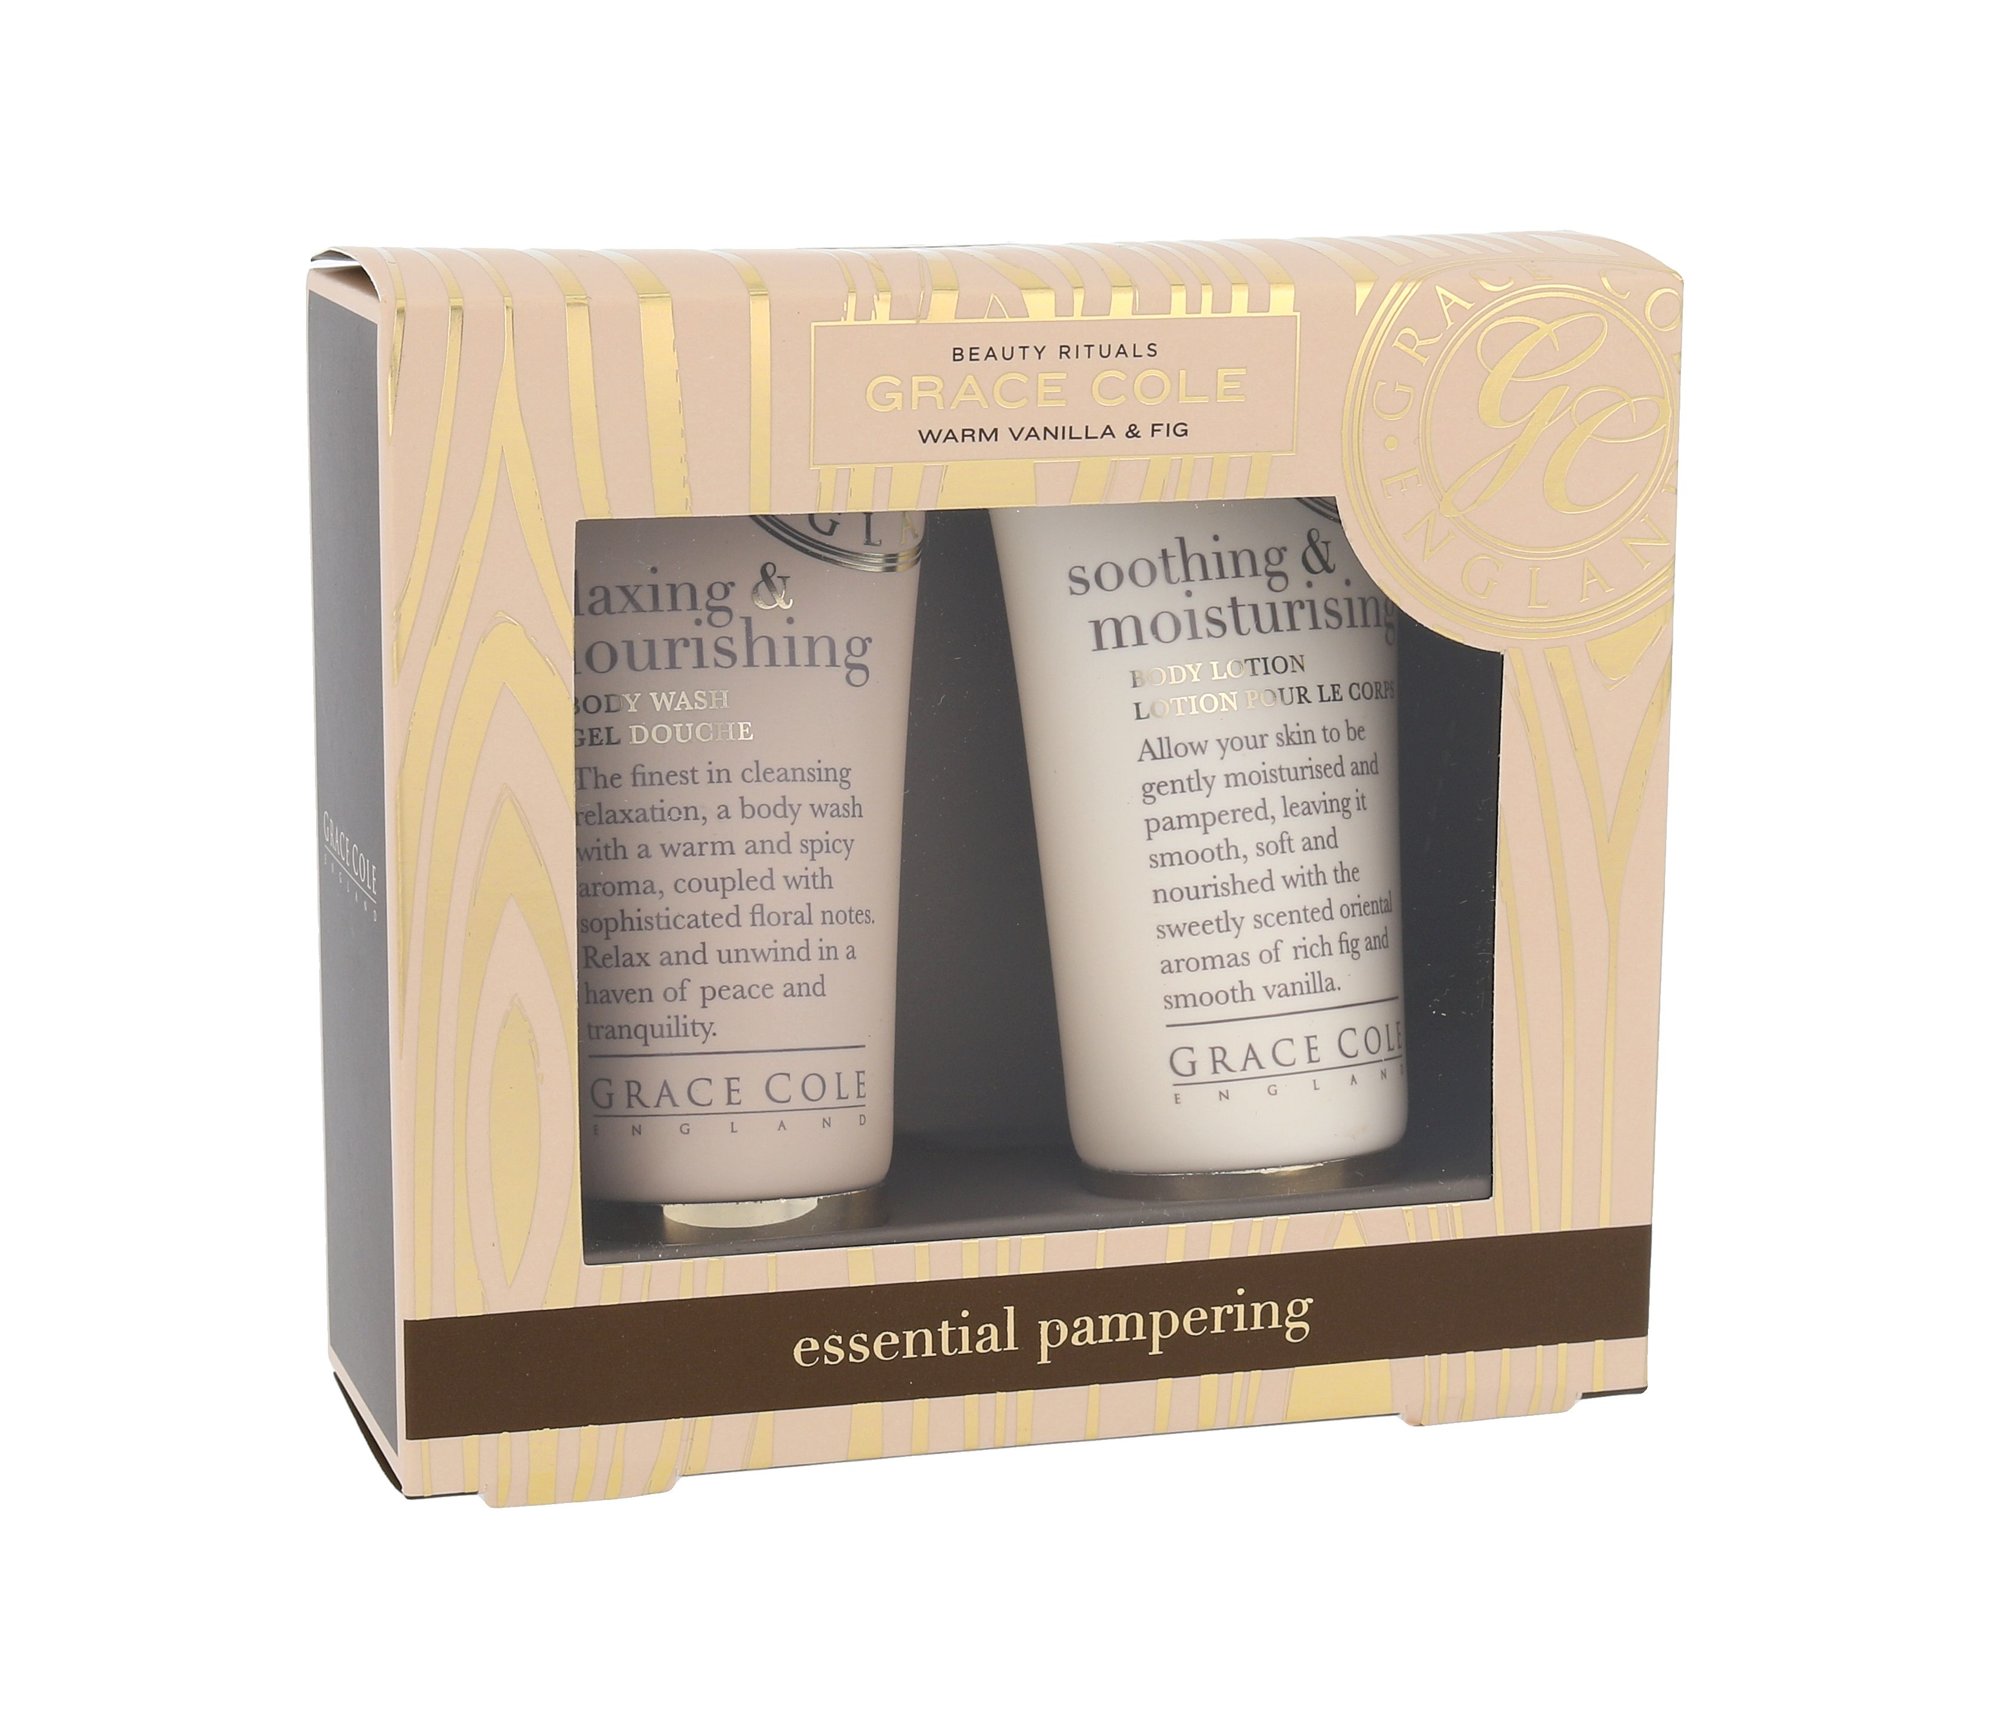 Grace Cole Warm Vanilla & Fig Essential Pampering Kit